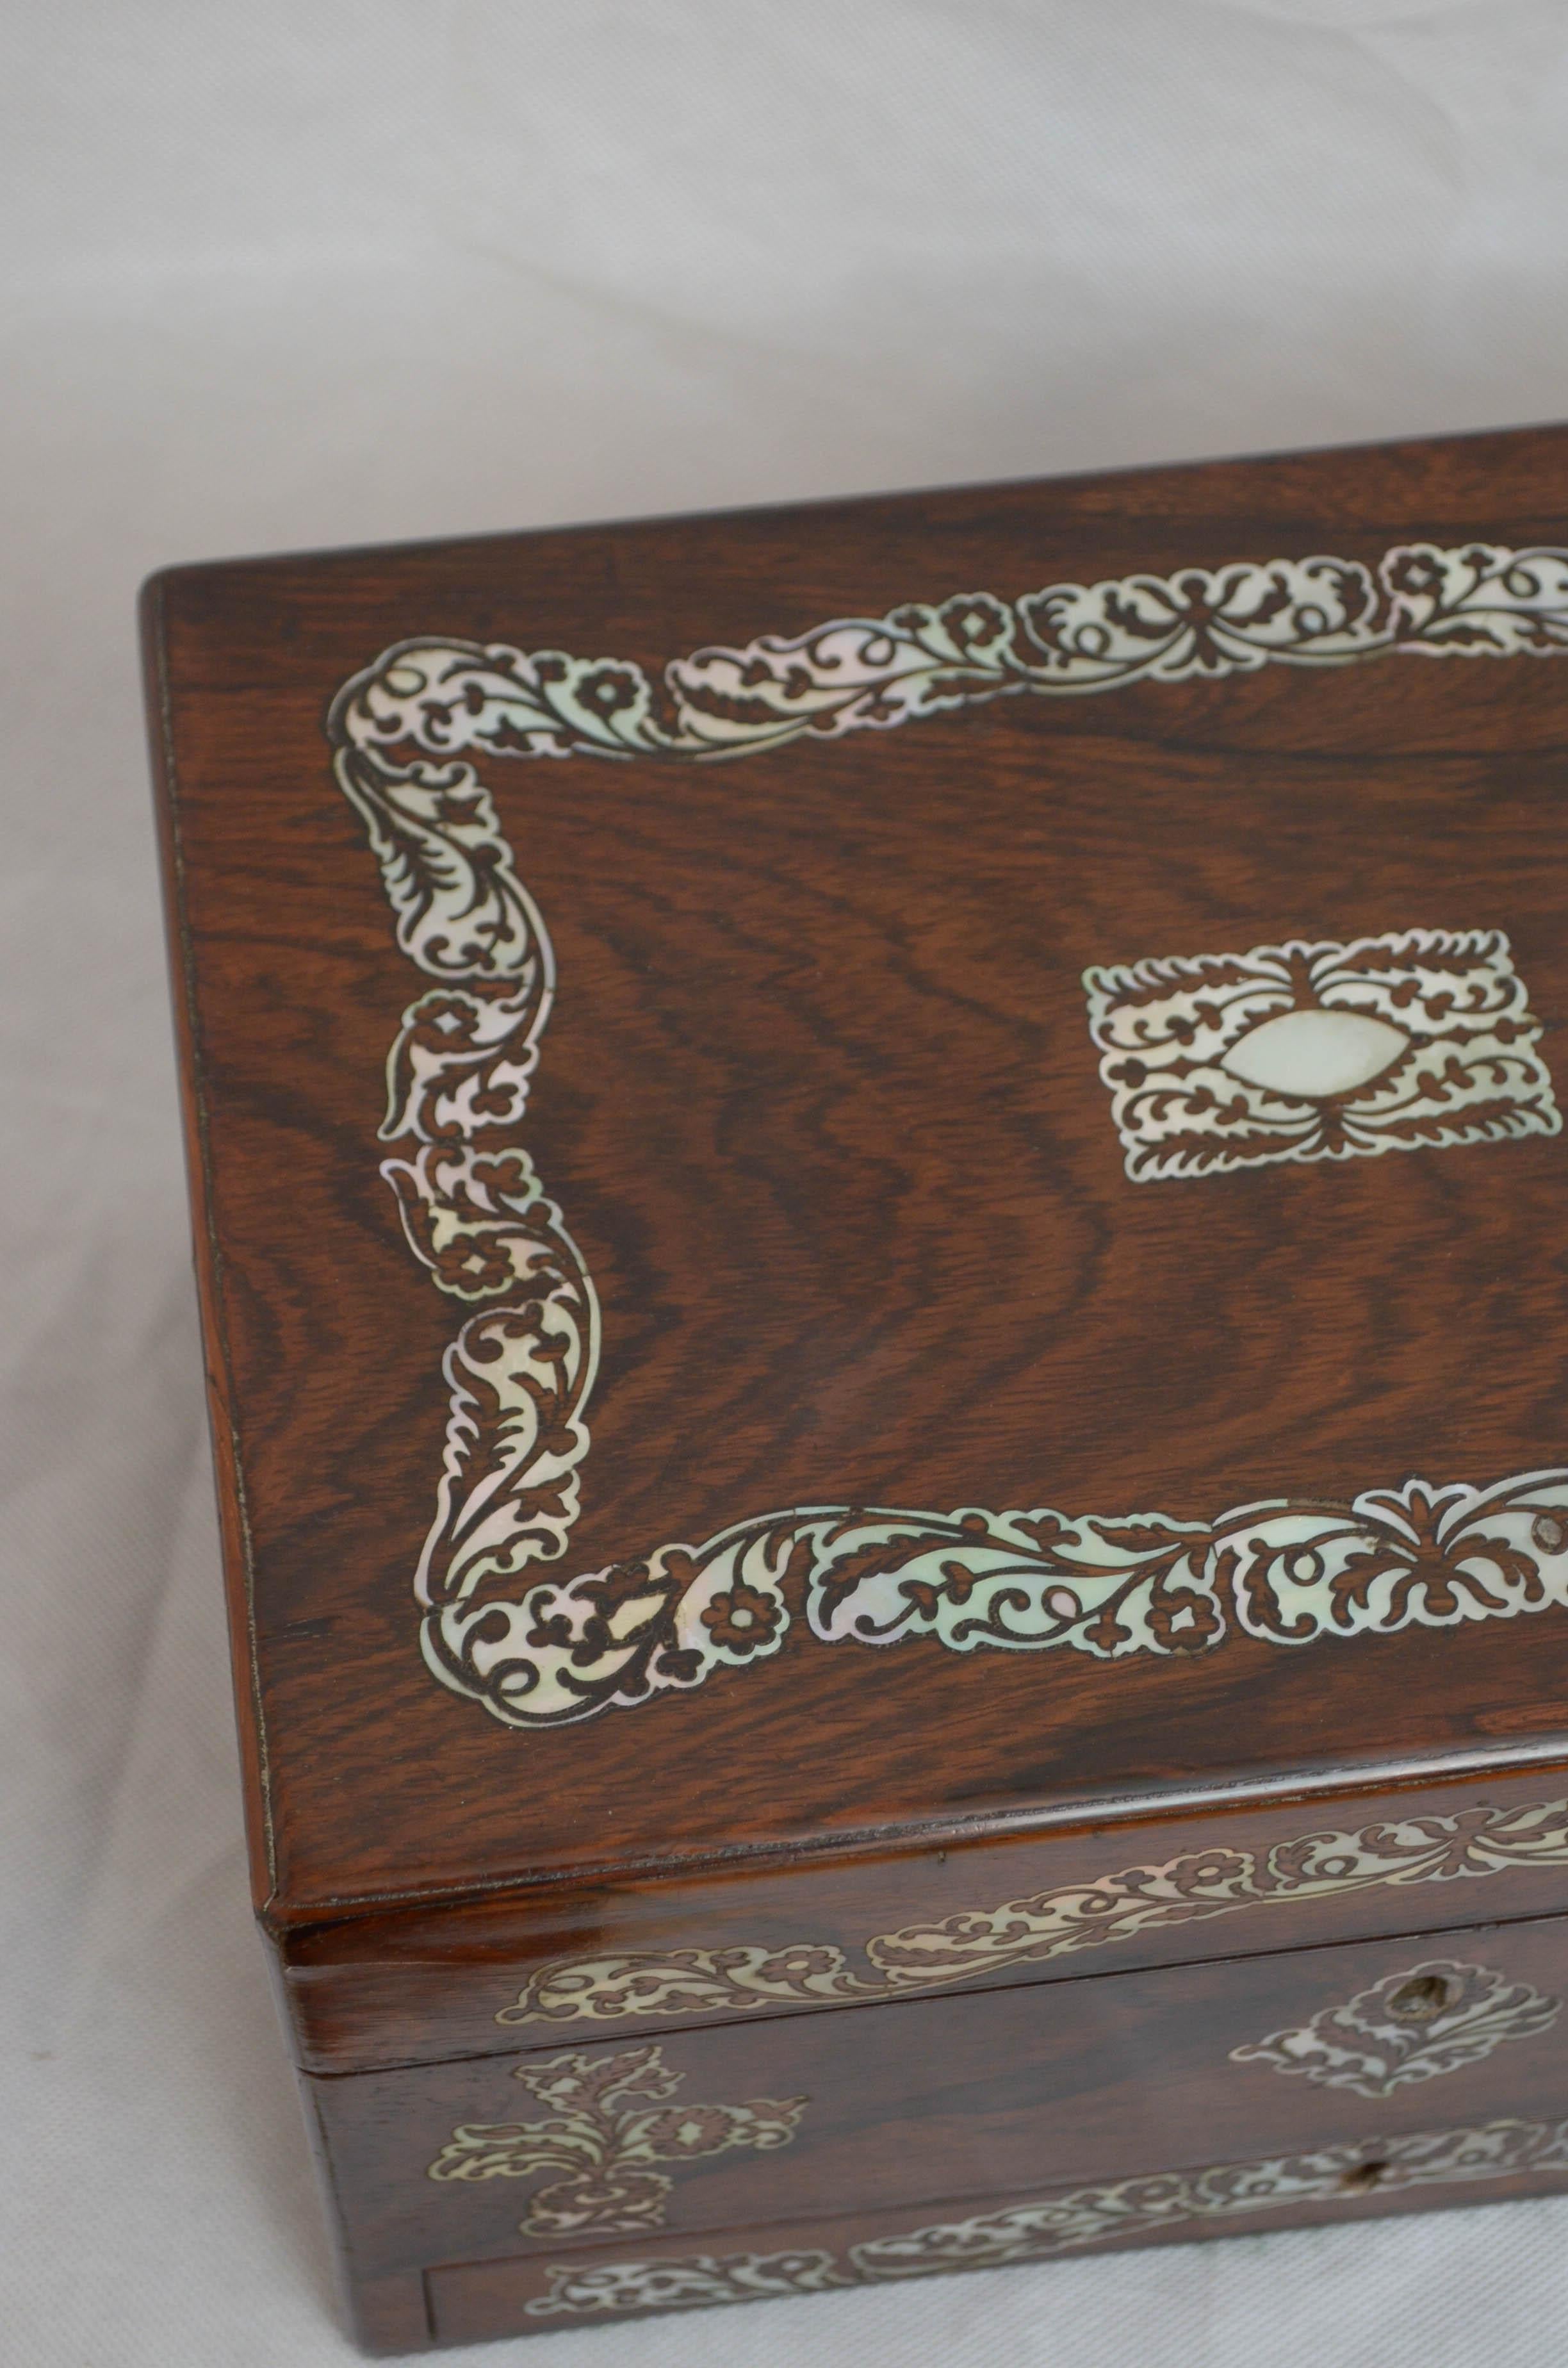 K0 fabulous early Victorian, rosewood and mother of pearl inlaid vanity box, sewing box with tray and drawer, having finely inlaid hinged lid which open to reveal original fitted interior with plush letter compartment and lift up tray with dividers,